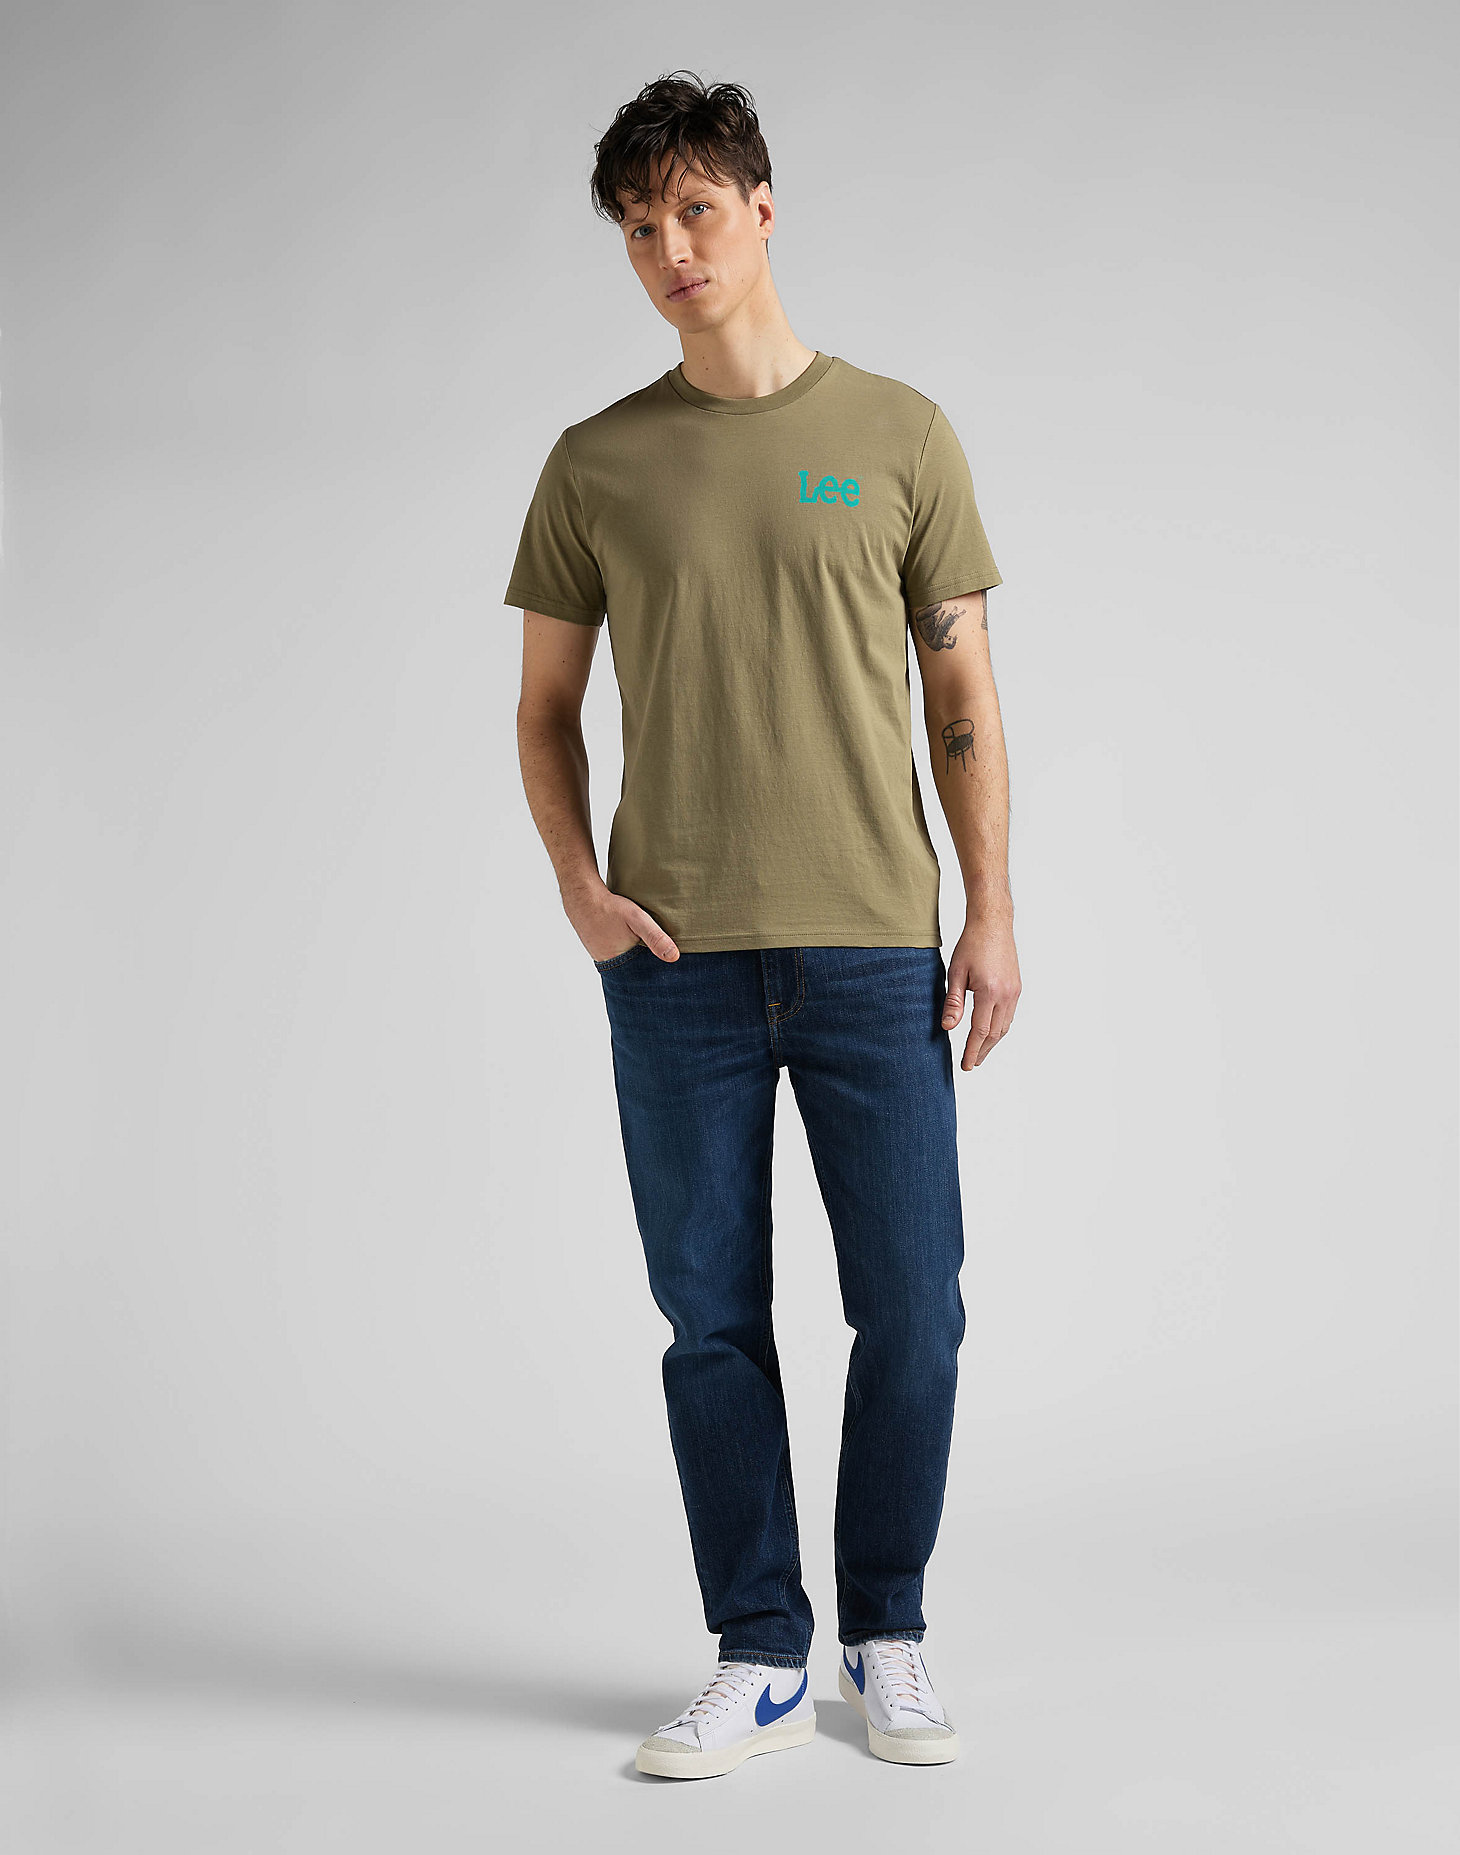 Wobbly Logo Tee in Brindle Green alternative view 2